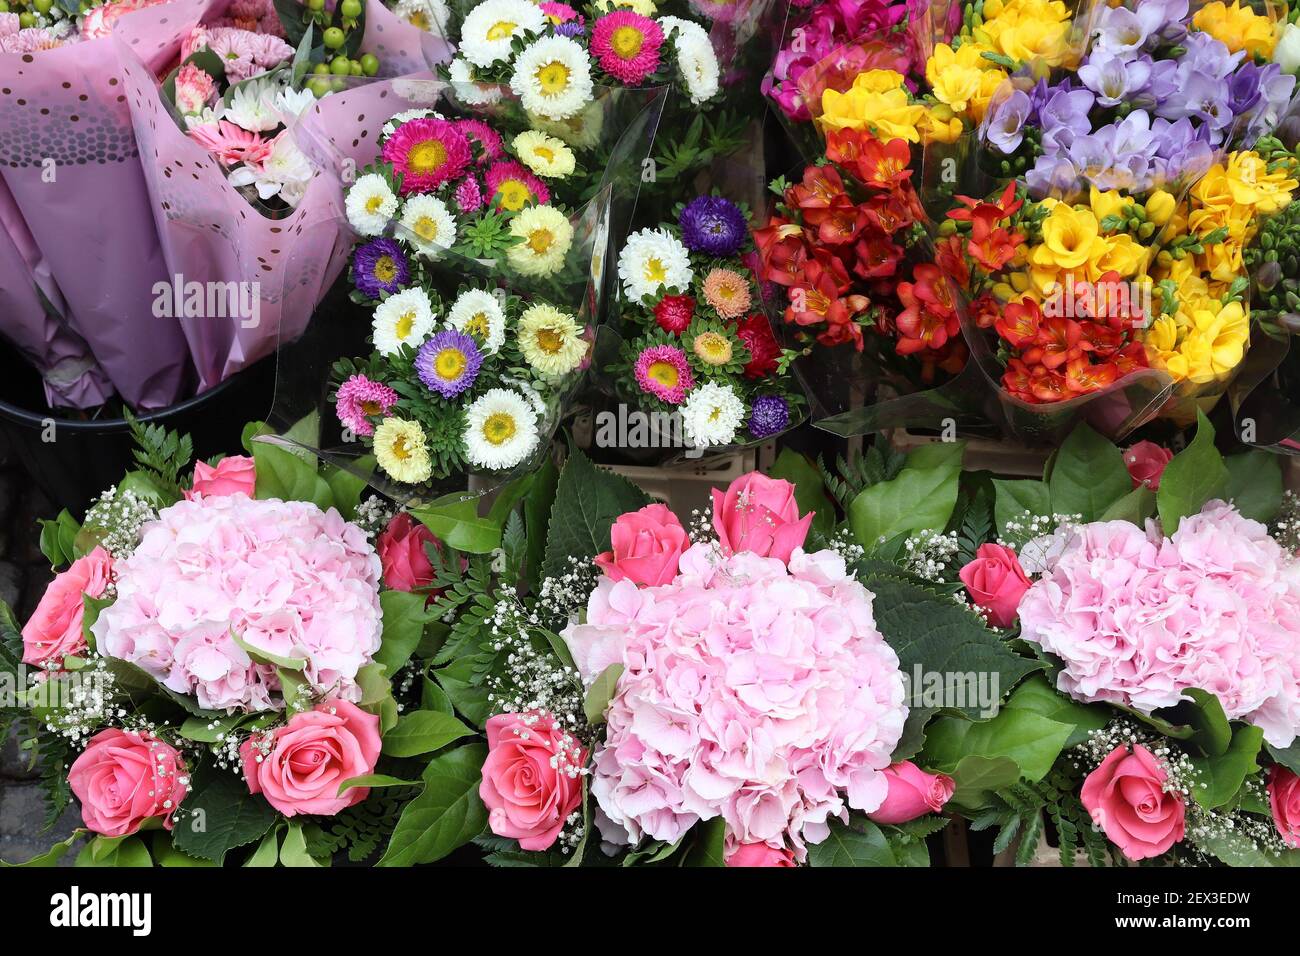 Florist shop ready bouquets in Stockholm, Sweden. Flower shop choice with hydrangea, rose and freesia flowers. Stock Photo